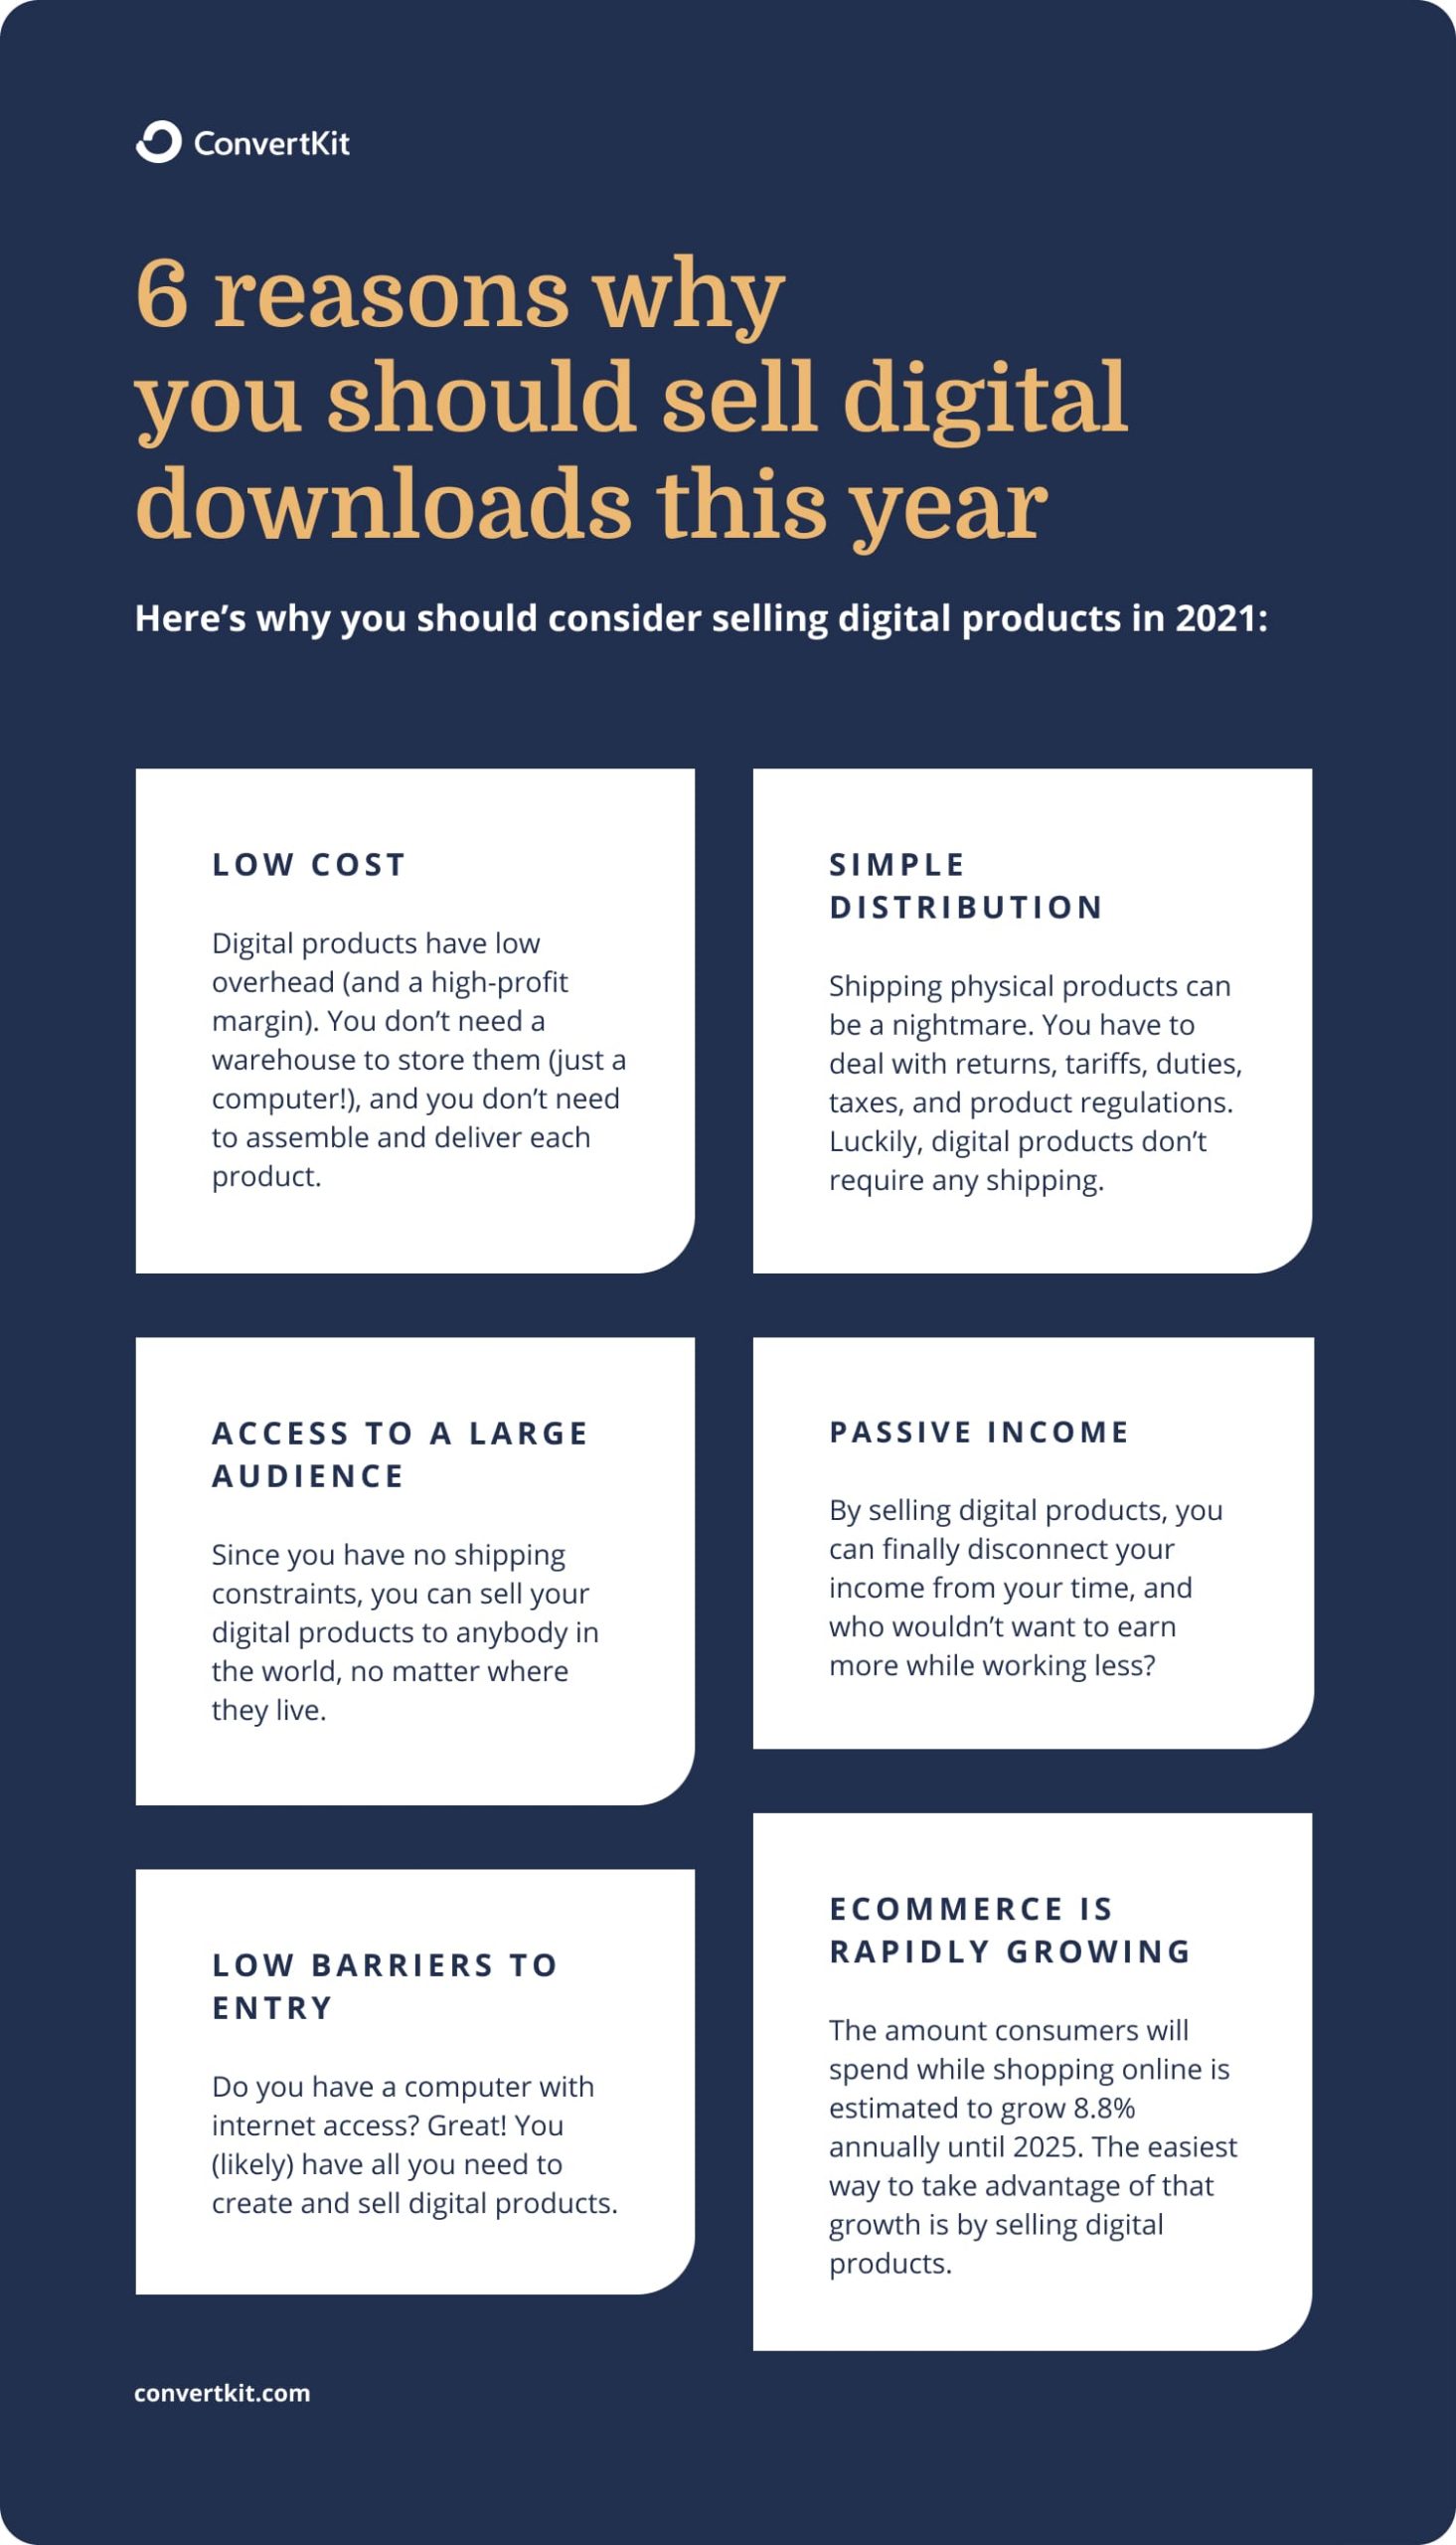 6 reasons why you should sell digital downloads